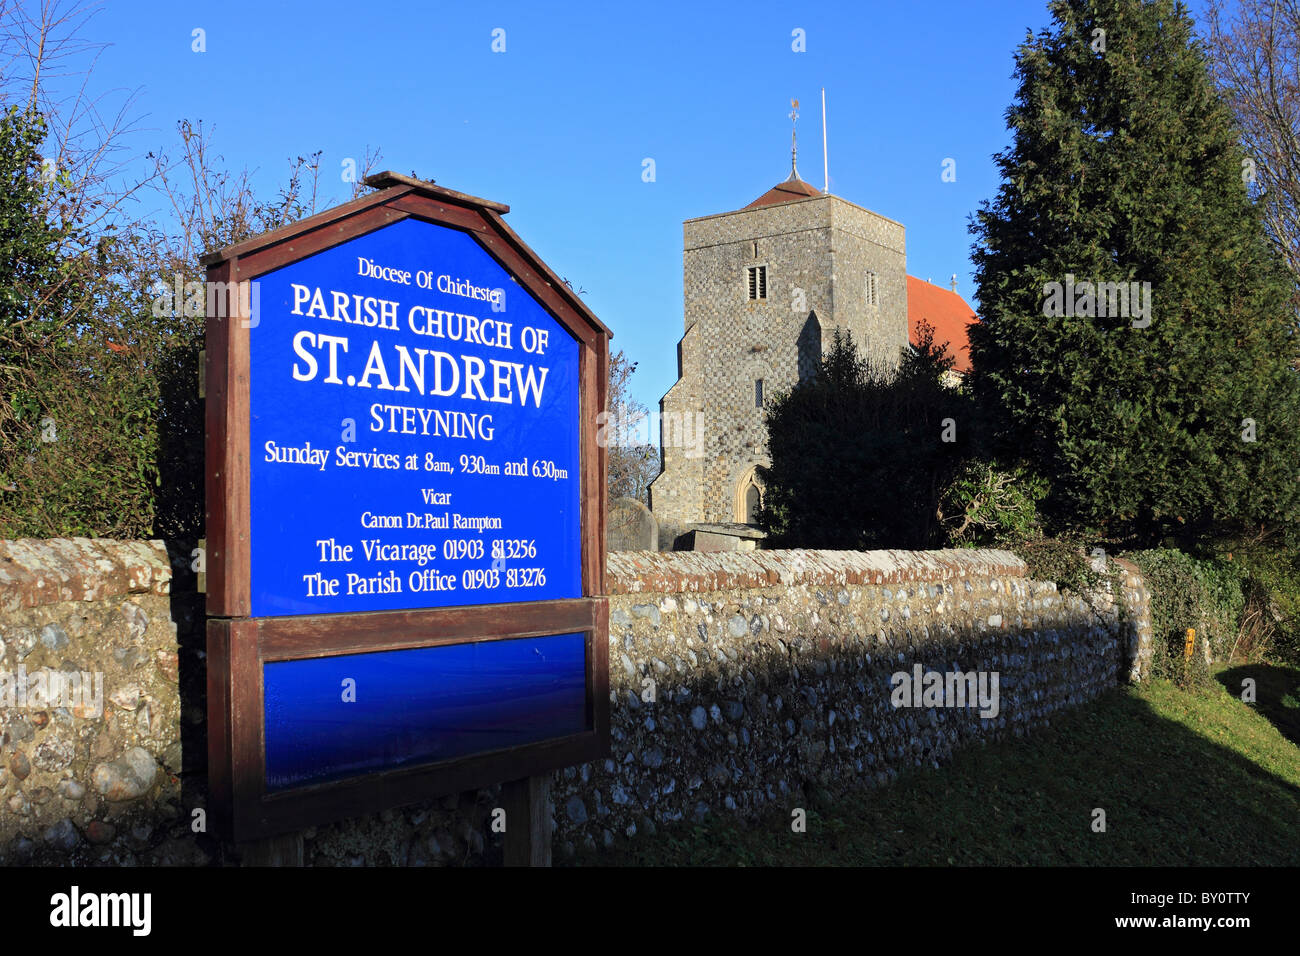 St Andrew's Parish Church in Church Street, Steyning, West Sussex, England UK. Stock Photo